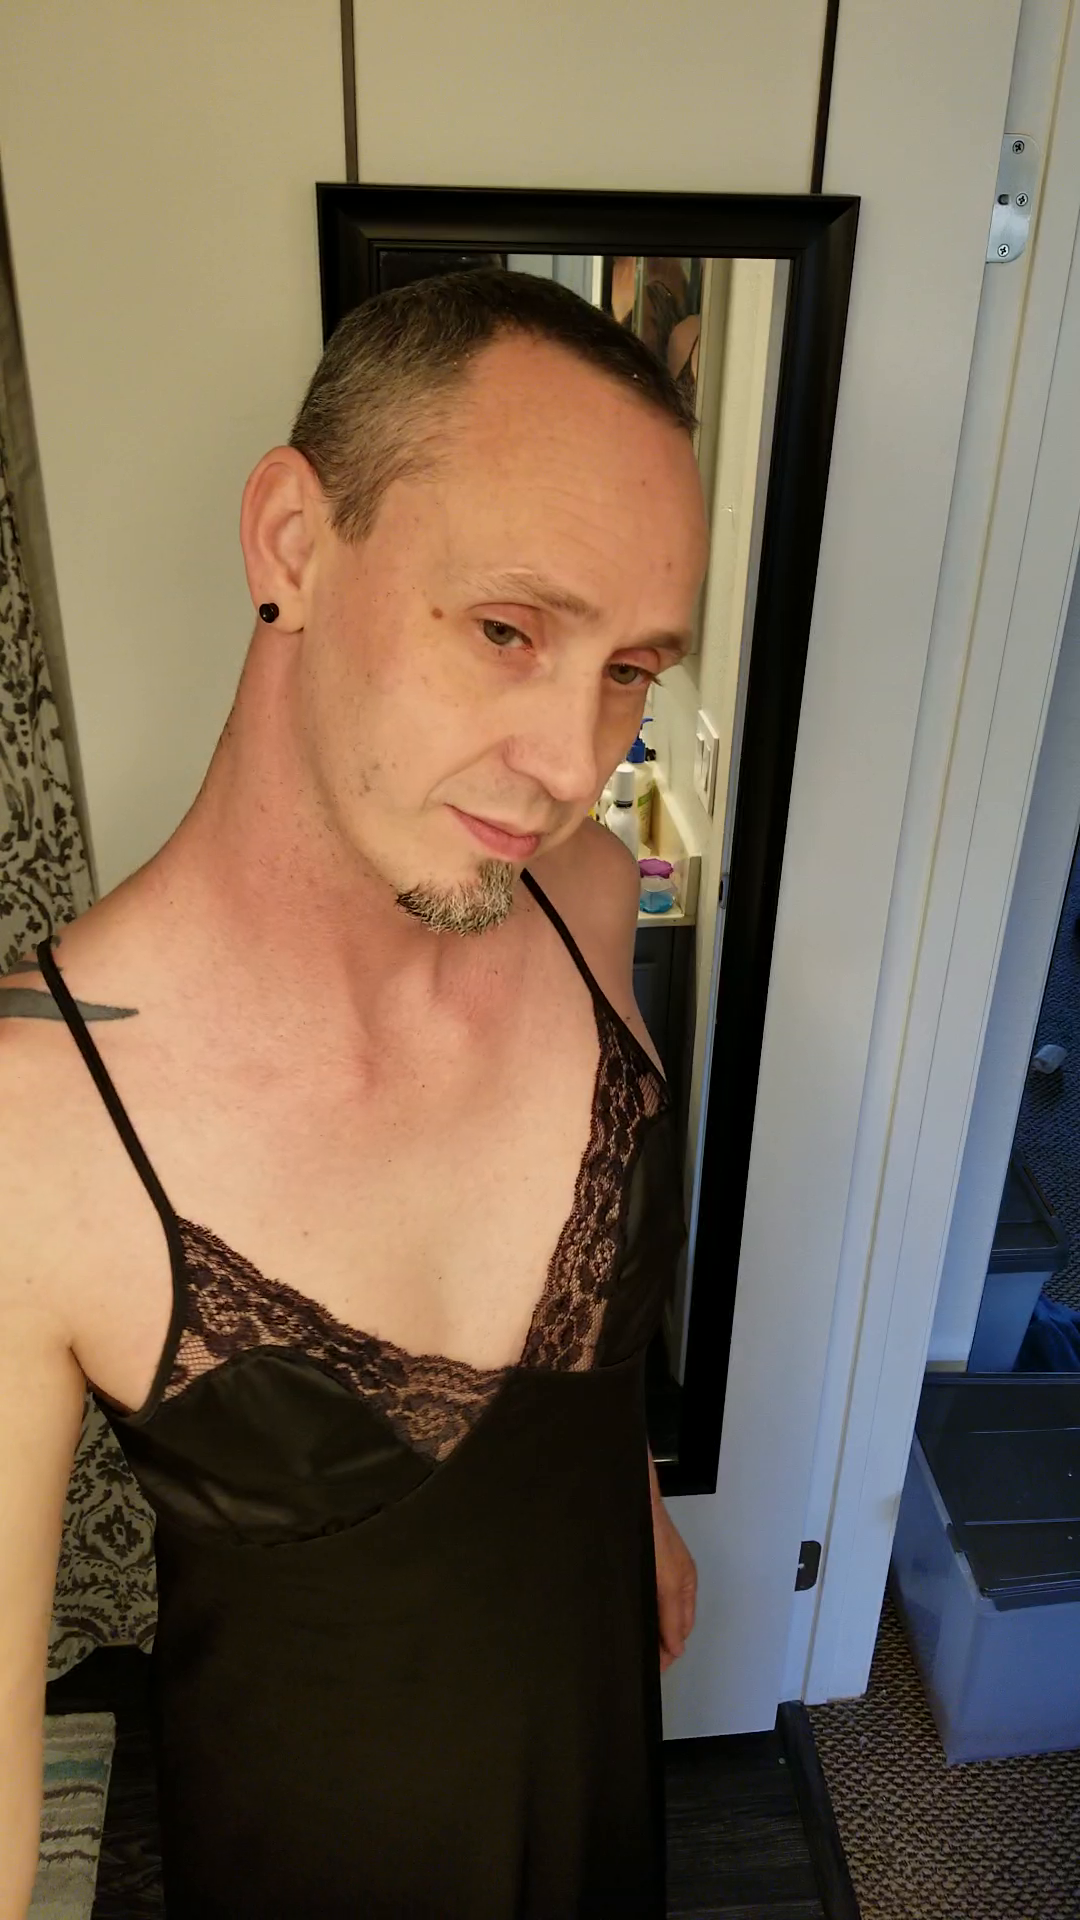 Watch the Video by JamesInLingerie with the username @JamesInLingerie, who is a verified user, posted on February 11, 2019 and the text says 'You must get dressed to get undressed'